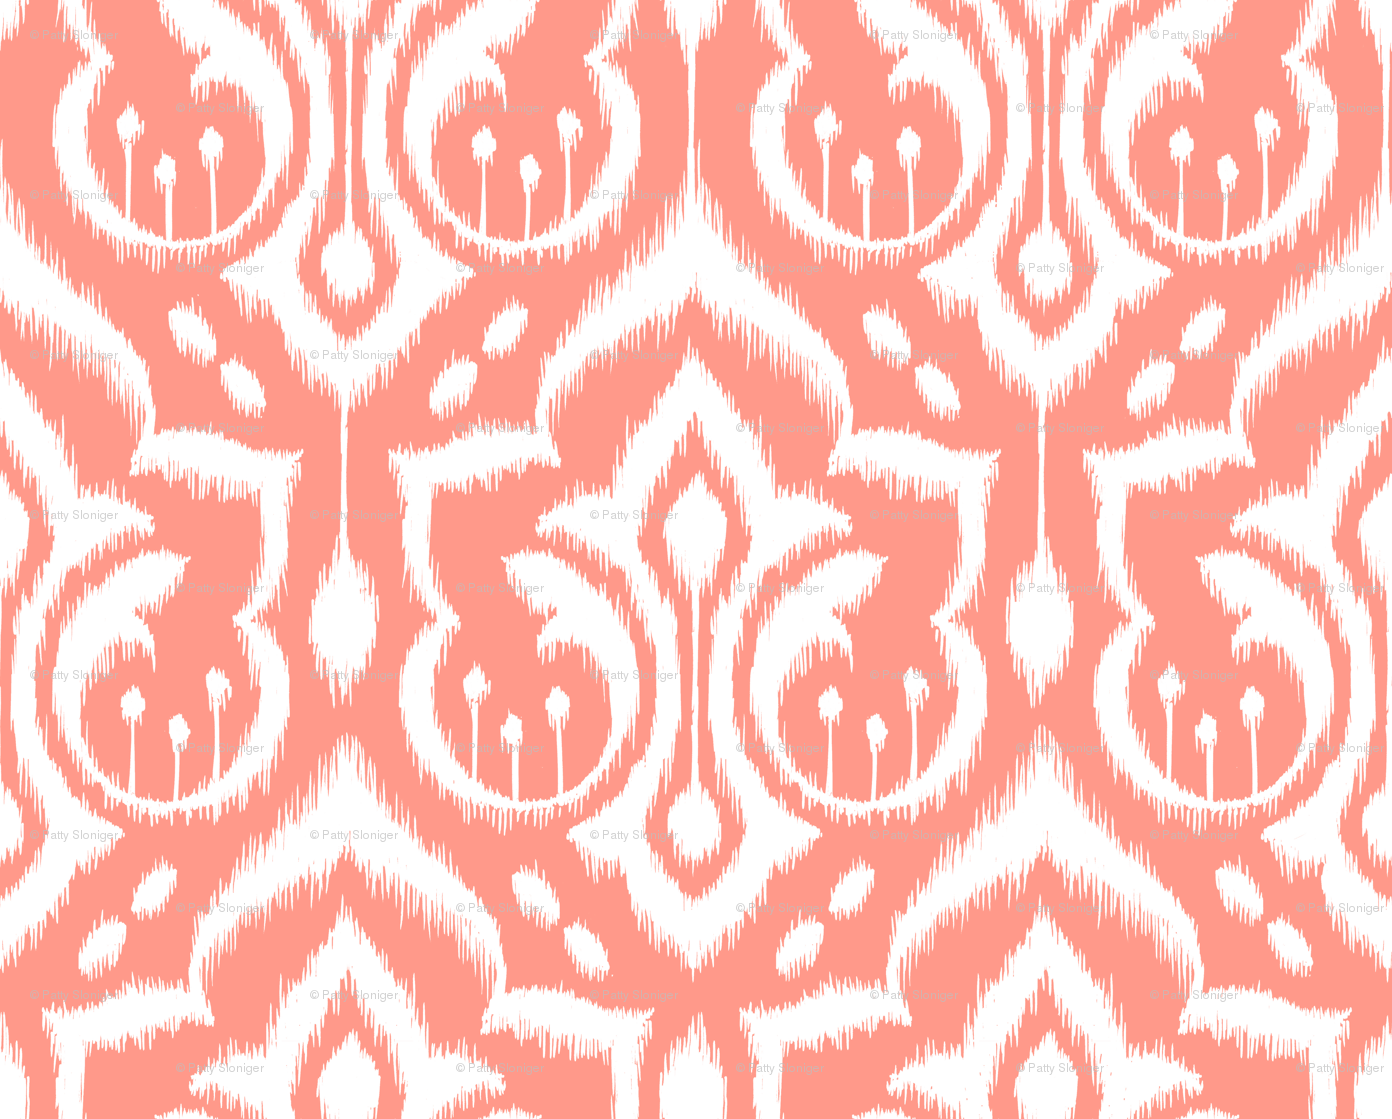 Coral Damask Wallpapers